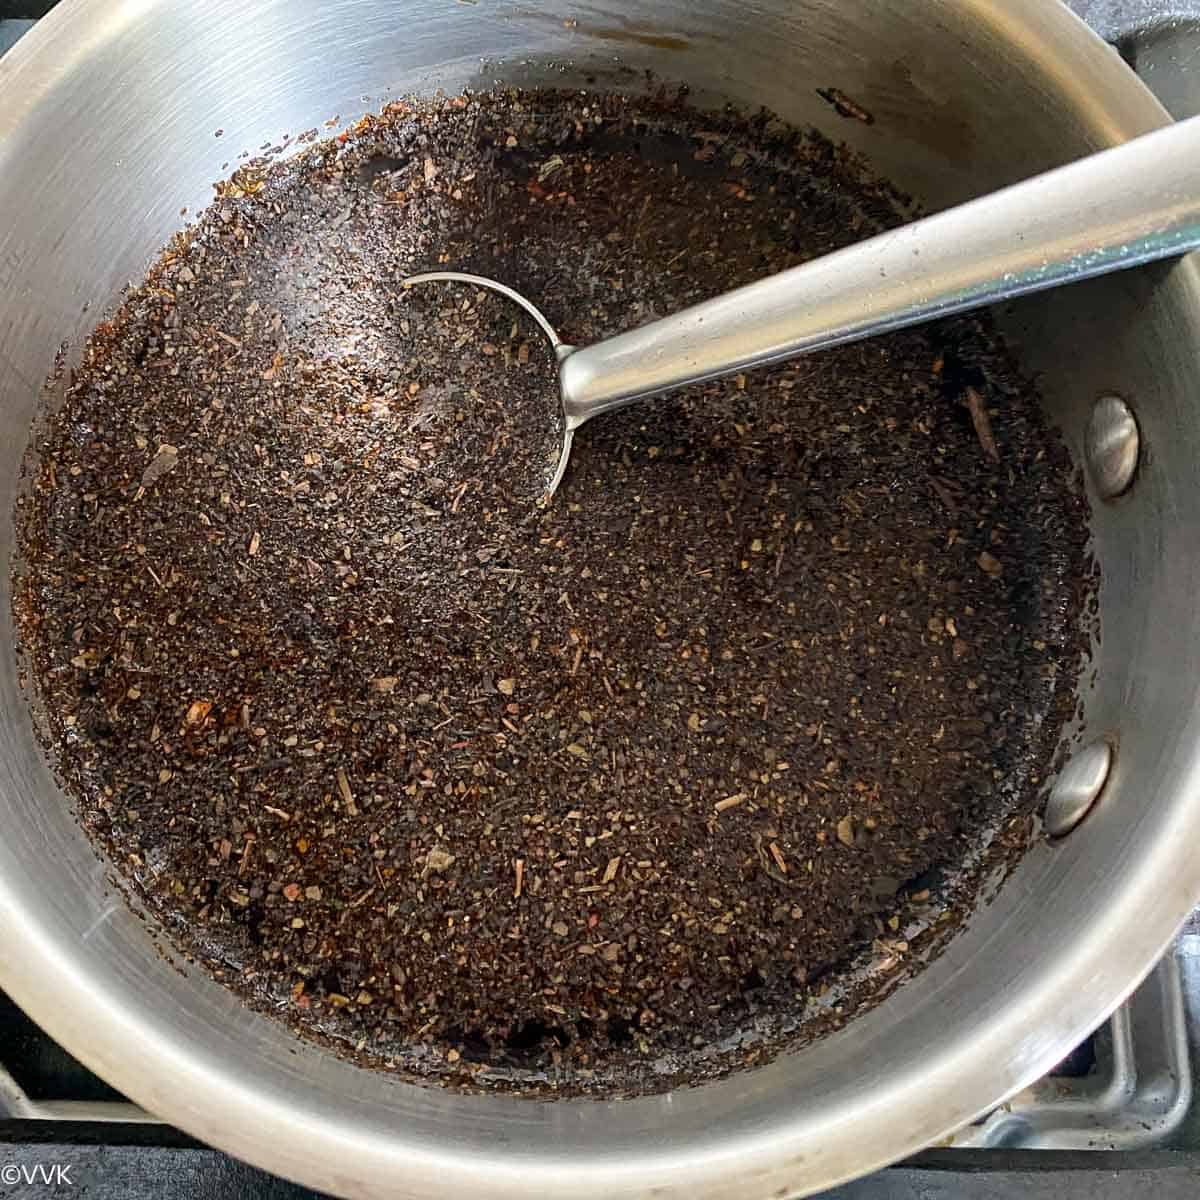 Thai tea mix with water ready to be brewed